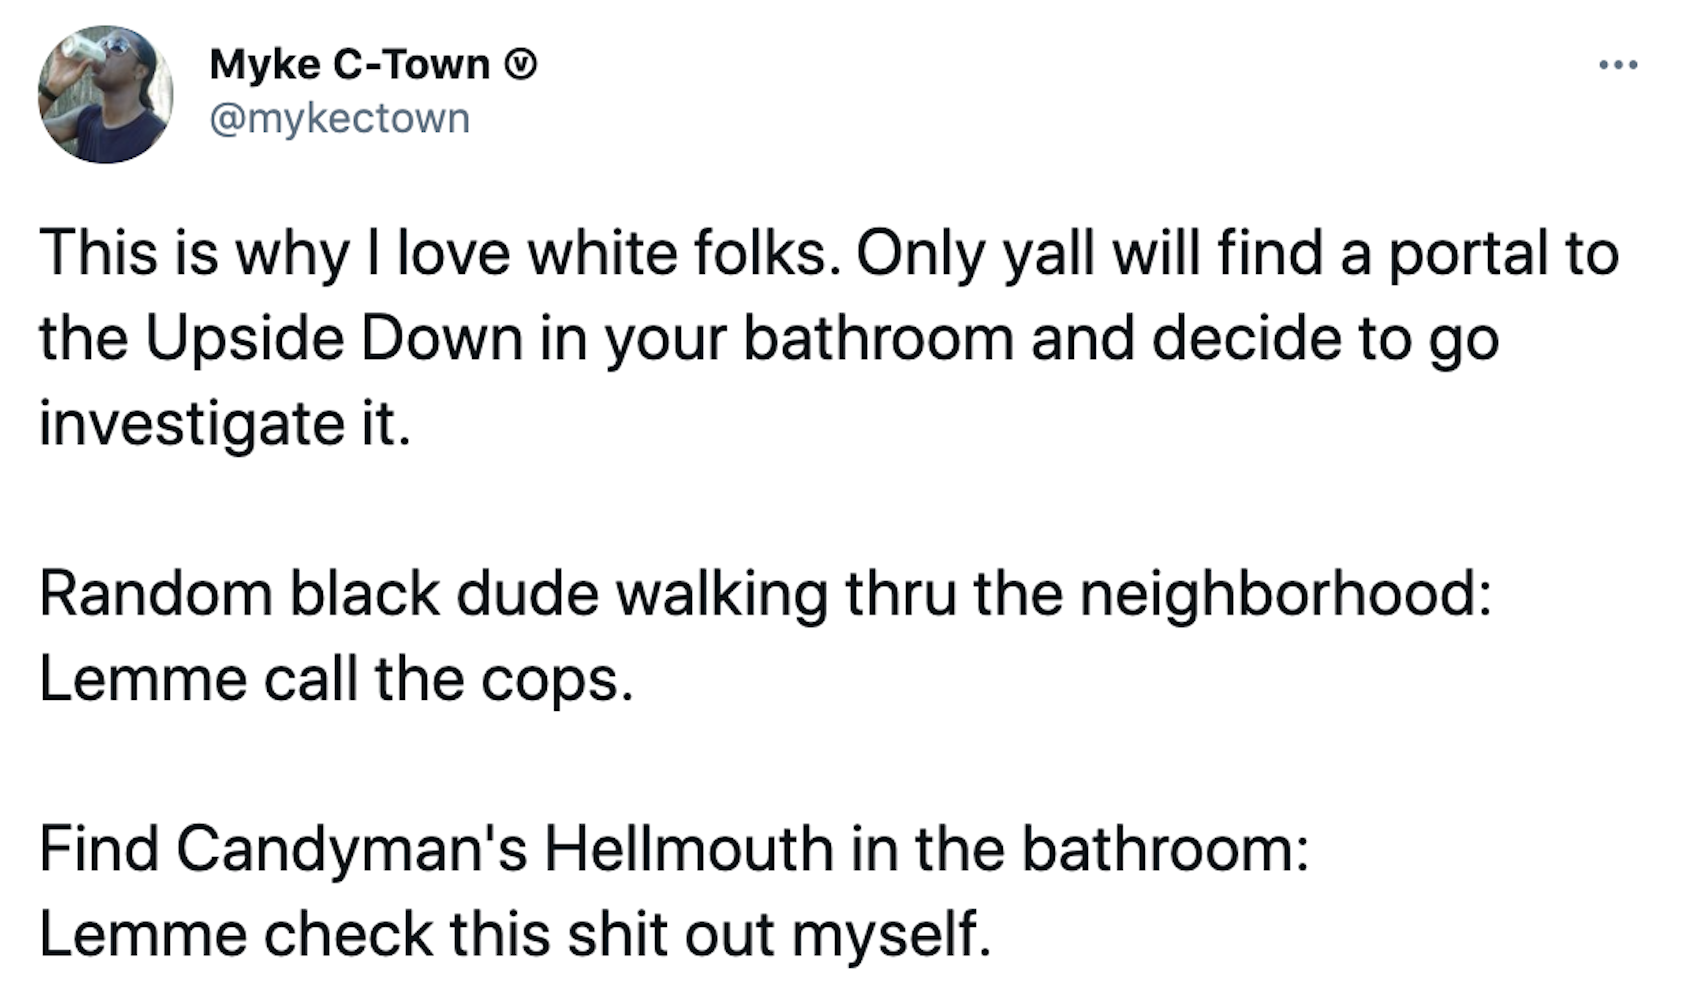 This is why I love white folks. Only yall will find a portal to the Upside Down in your bathroom and decide to go investigate it. Random black dude walking thru the neighborhood: Lemme call the cops. Find Candyman's Hellmouth in the bathroom: Lemme check this shit out myself.